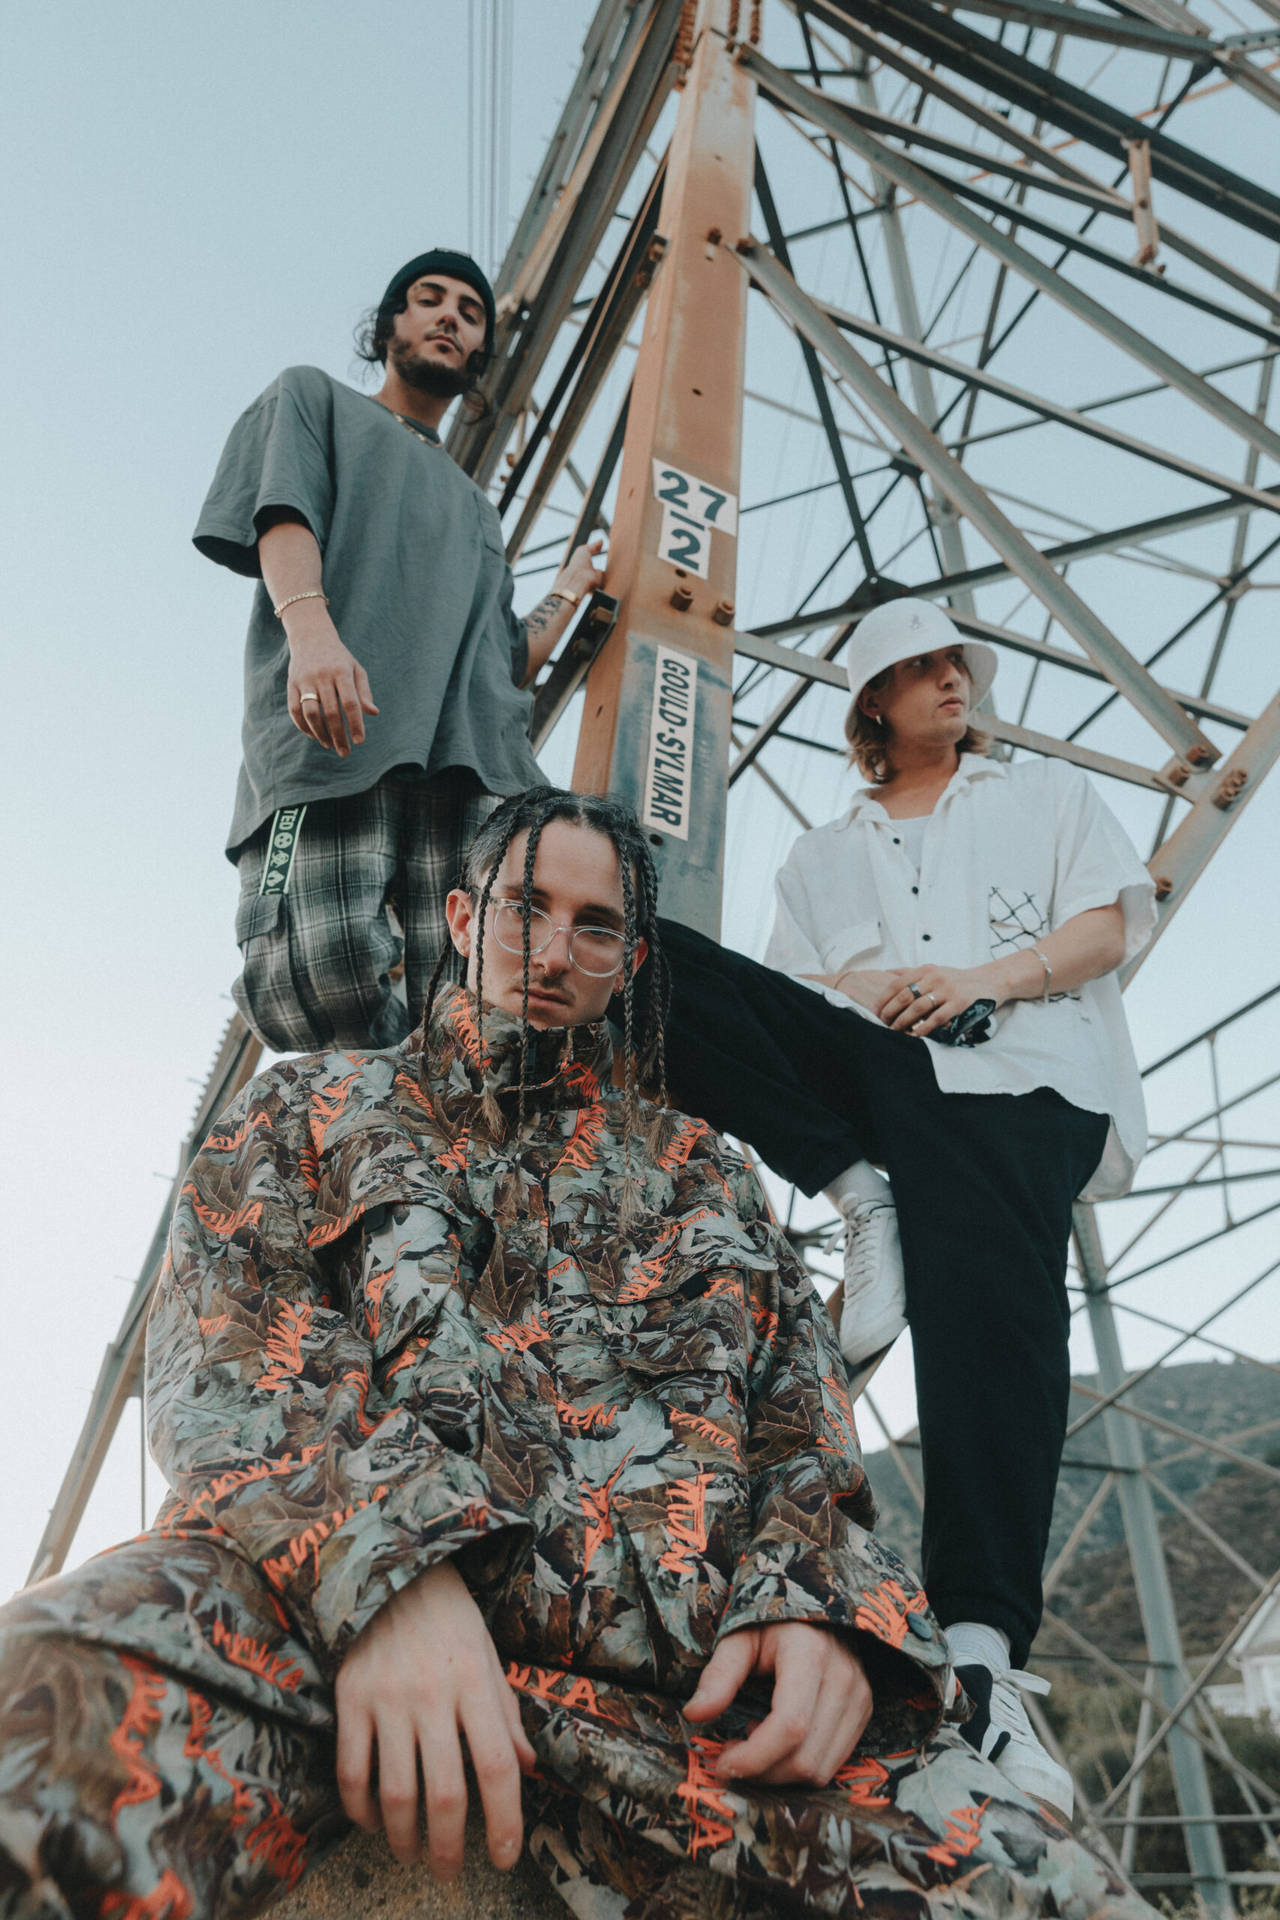 Keep chasing your dreams with Chase Atlantic Wallpaper